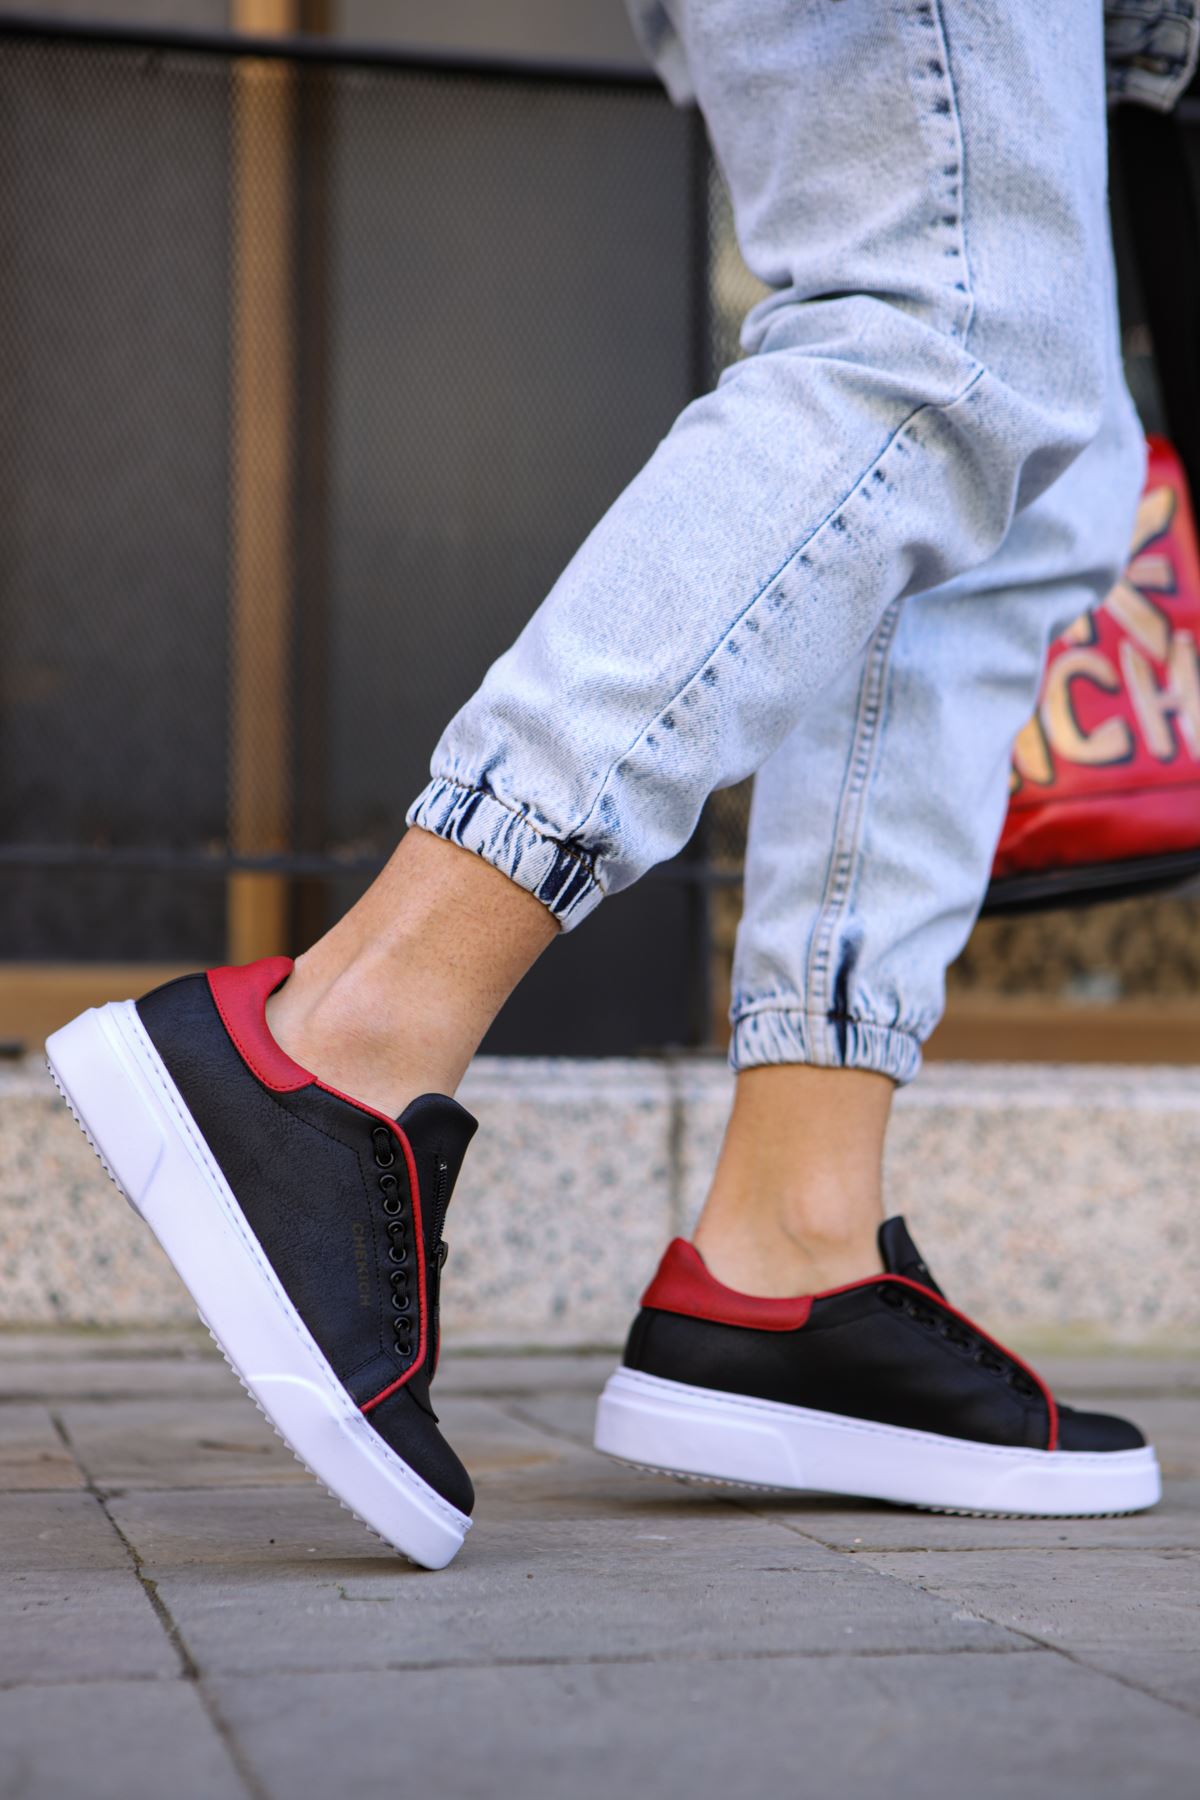 Chekich Men's Shoes Red and Black Sneakers Artificial Leather Spring Autumn Season Zipper Casual Sport Shoe Walking Running Original Vulcanized Breathable Lightweight Sneakers Hot Sale Comfortable Footwear Hiking CH092